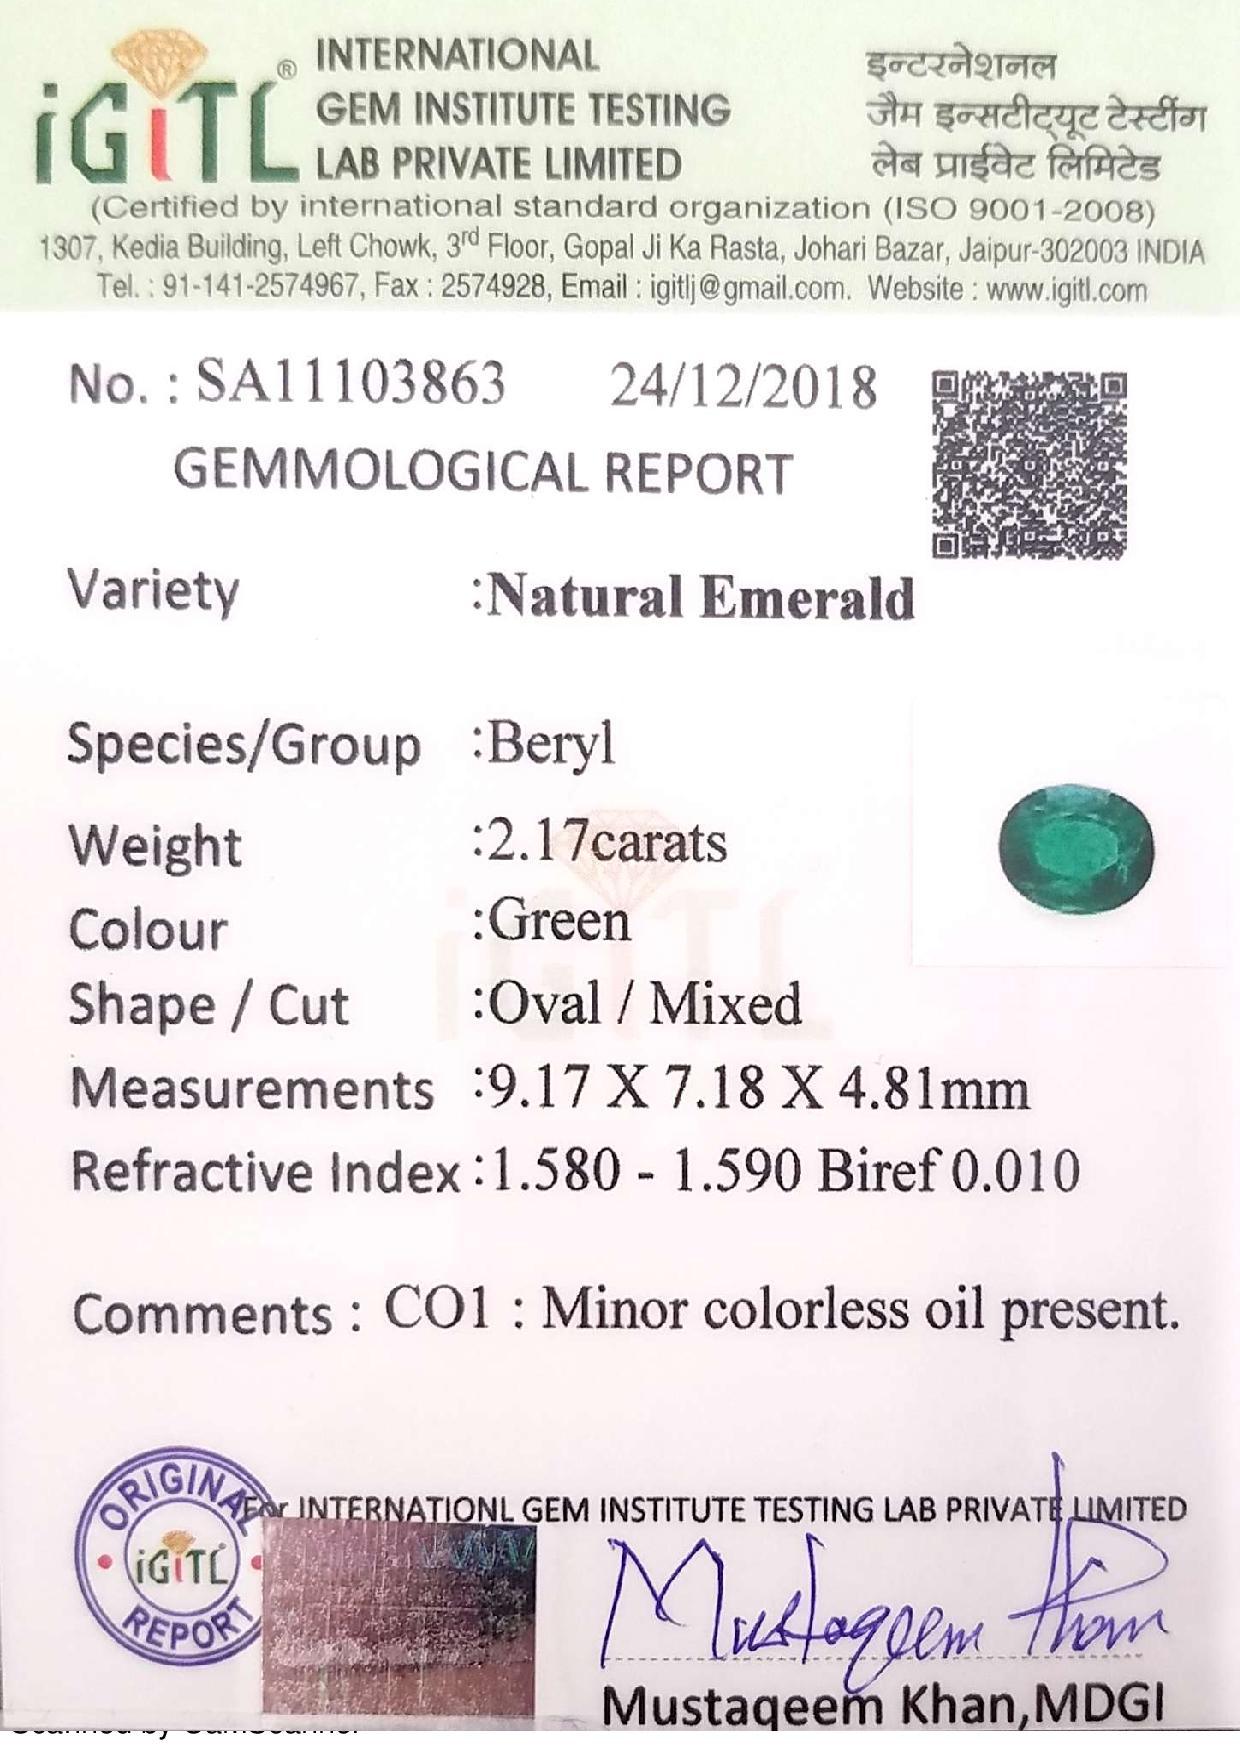 Oval Cut 2.17 Ct Weight Oval Shaped Green Color IGITL Certified Emerald Gemstone Pendant For Sale